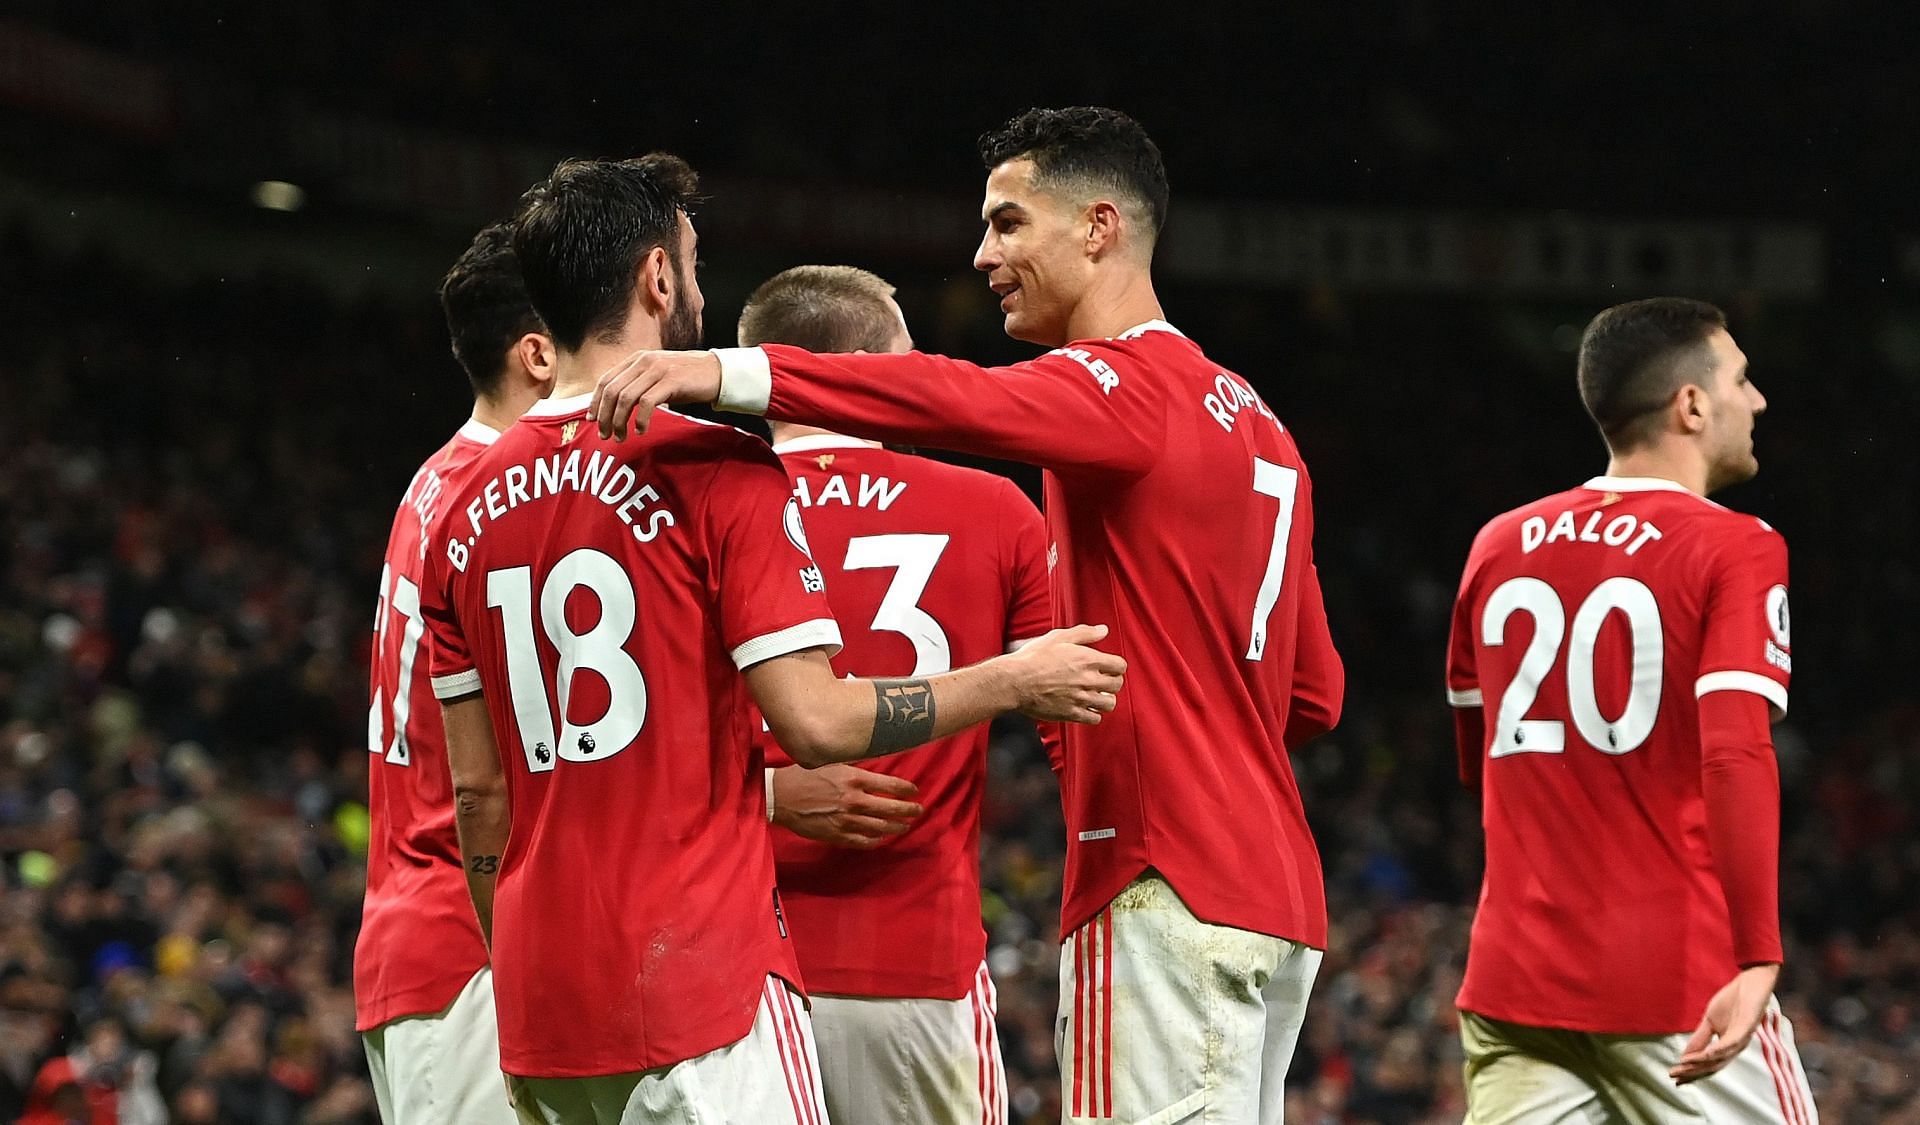 Manchester United beat Brighton &amp; Hove Albion 2-0 at Old Trafford on Tuesday